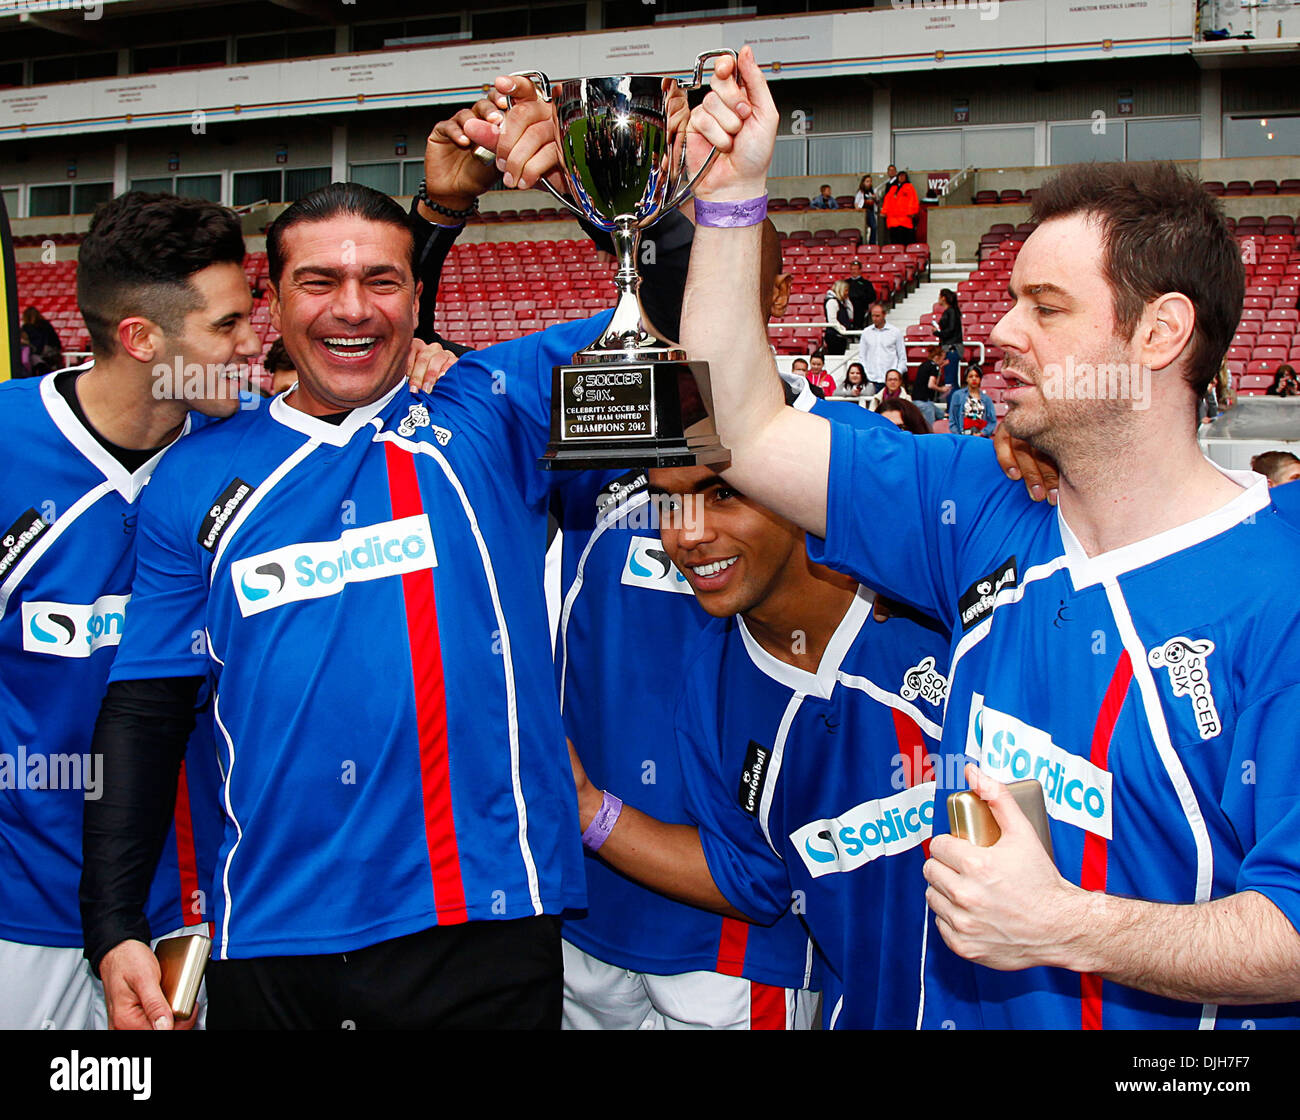 Tamer Hassan and Danny Dyer holding up trophy after winning Celebrity Soccer Six match held at West Ham Football Club grounds Stock Photo